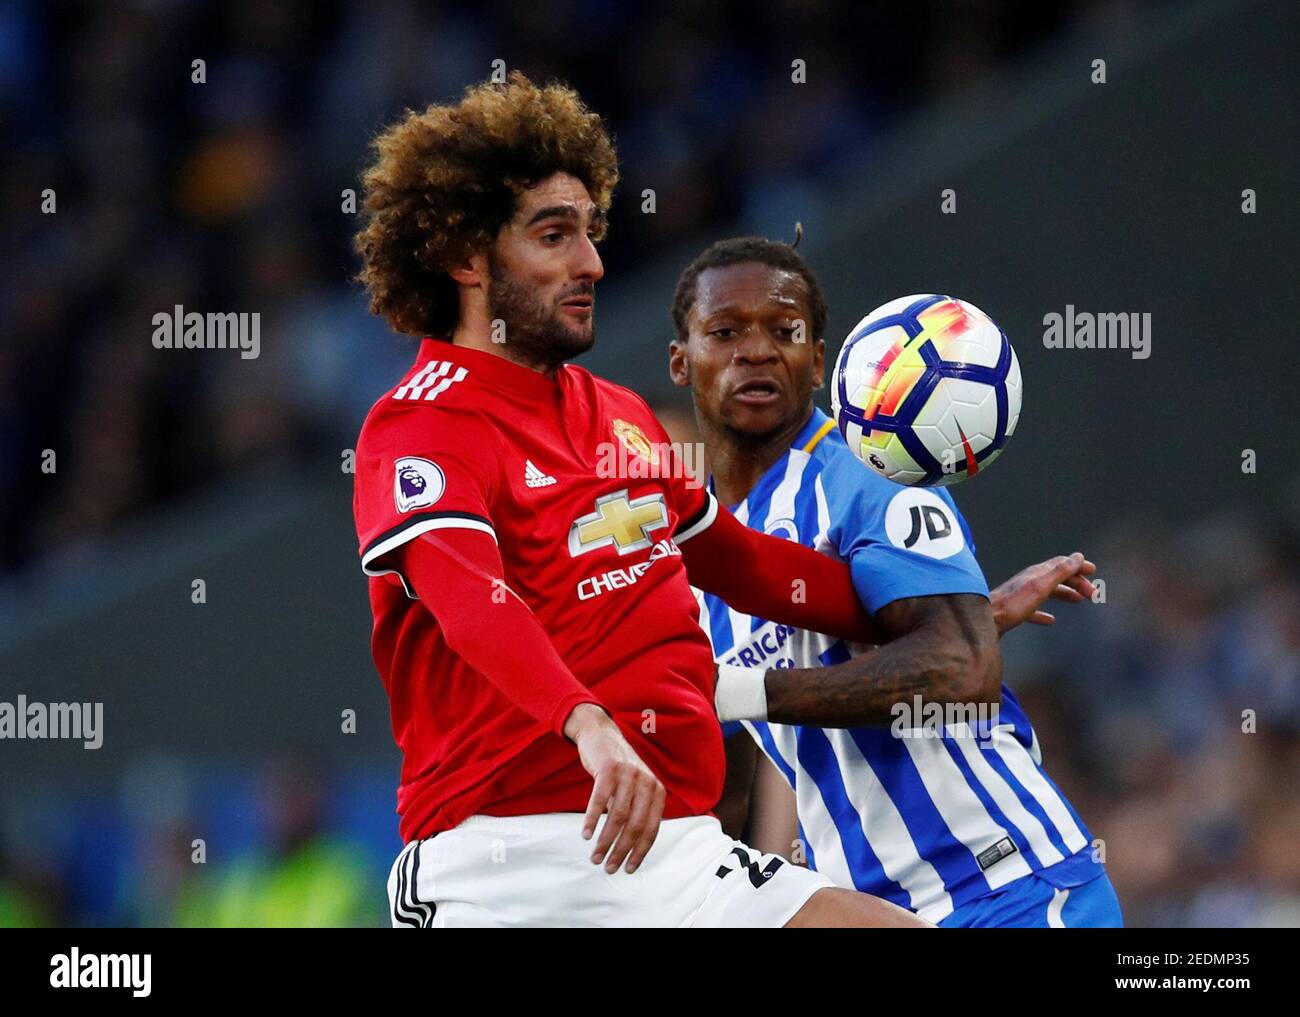 Soccer Football - Premier League - Brighton & Hove Albion v Manchester United - The American Express Community Stadium, Brighton, Britain - May 4, 2018   Manchester United's Marouane Fellaini in action with Brighton's Gaetan Bong   REUTERS/Eddie Keogh    EDITORIAL USE ONLY. No use with unauthorized audio, video, data, fixture lists, club/league logos or "live" services. Online in-match use limited to 75 images, no video emulation. No use in betting, games or single club/league/player publications.  Please contact your account representative for further details. Stock Photo